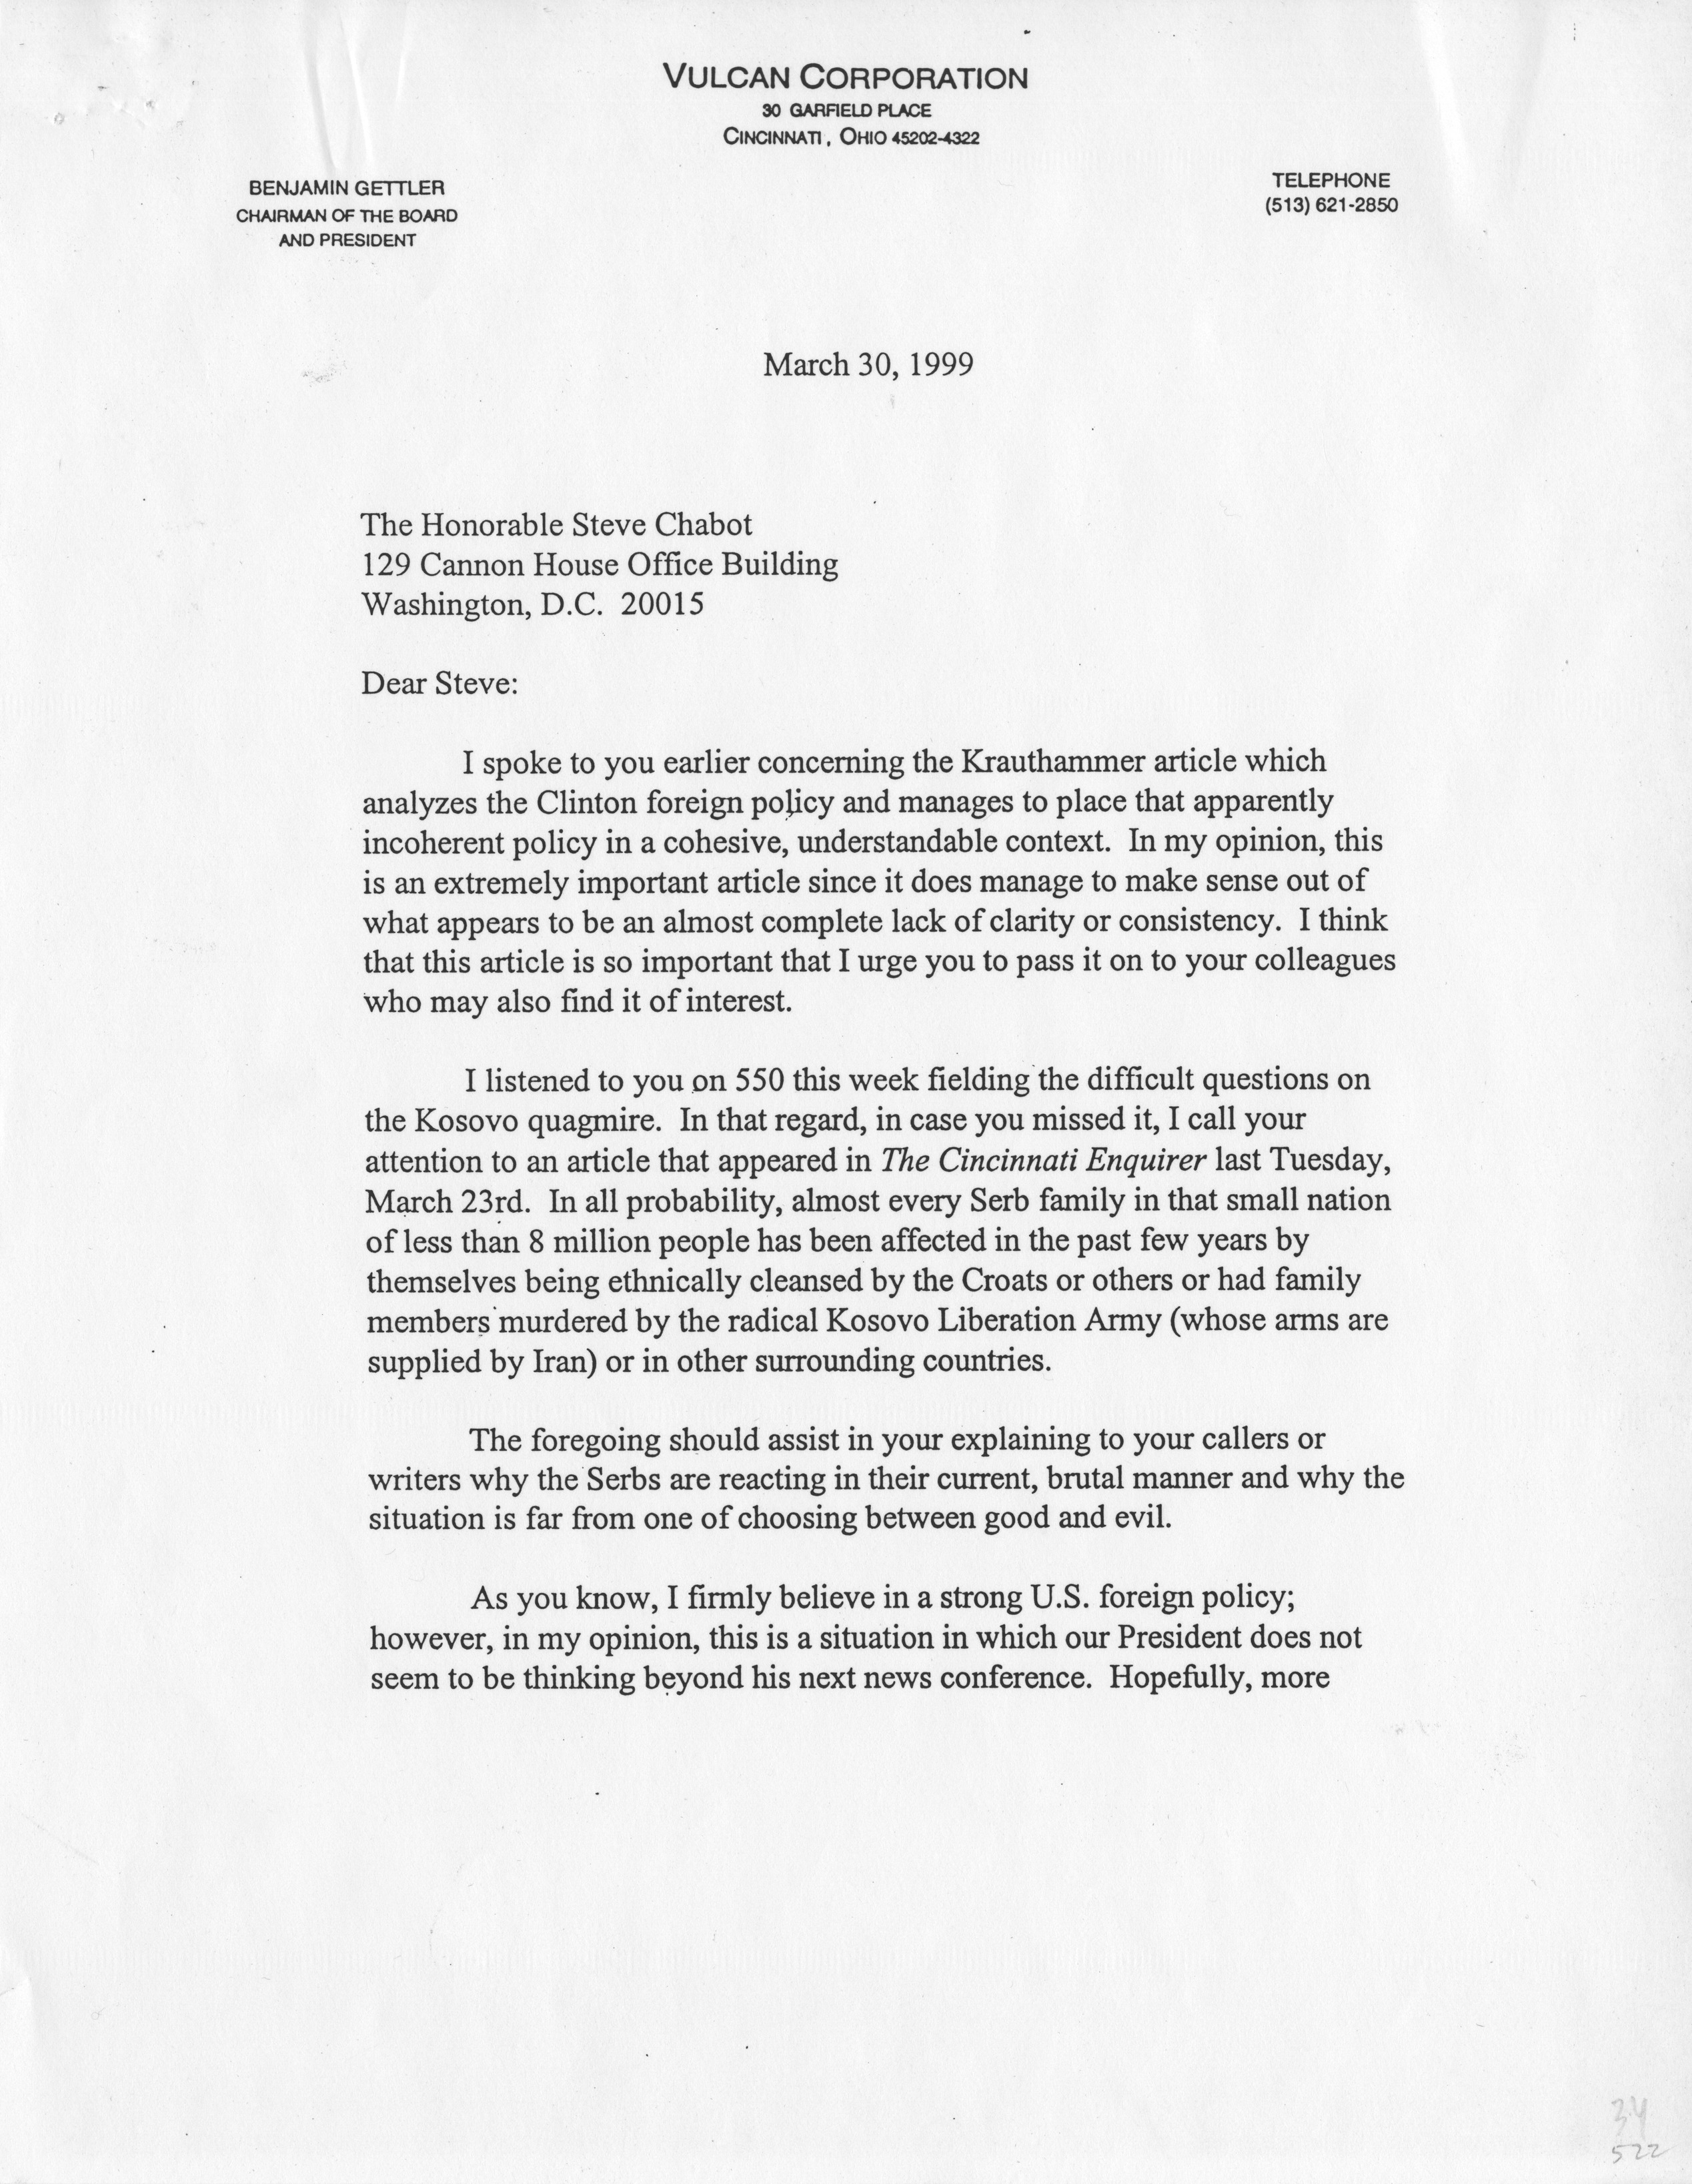 A letter dated March 30, 1999 from Benjamin Gettler to U.S. Representative Steve Chabot regarding affairs in Serbia.